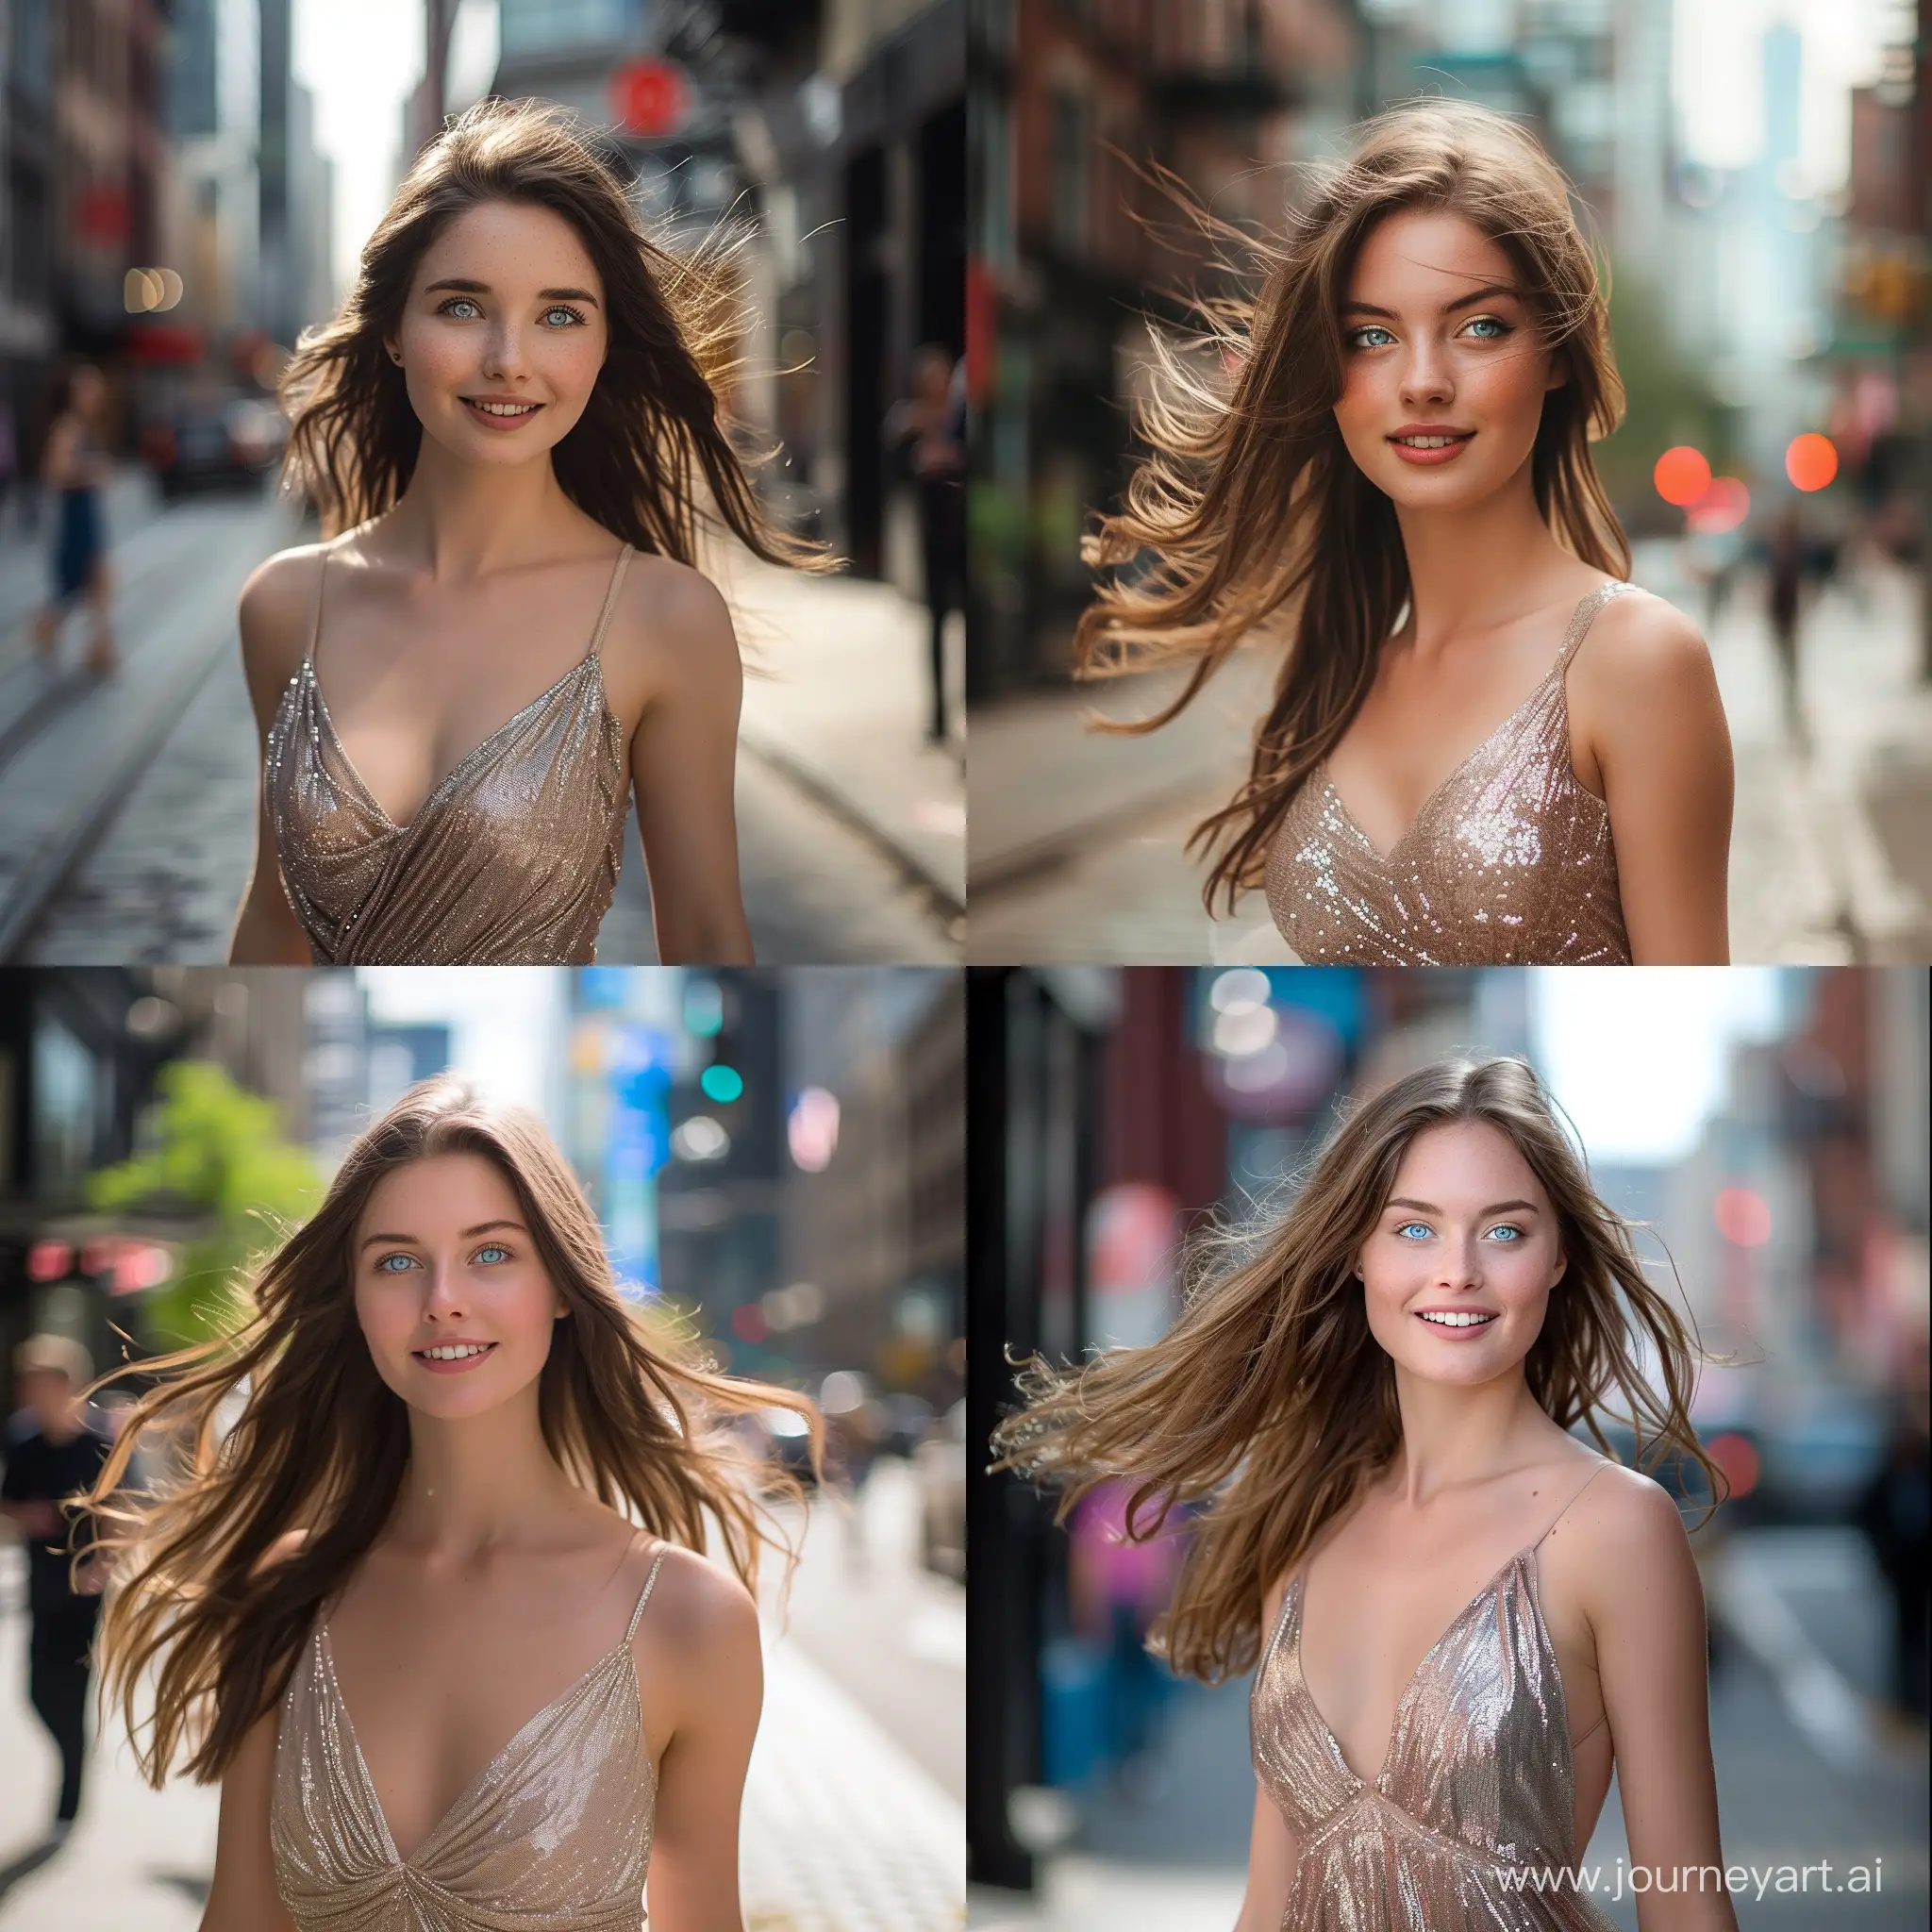 A captivating young woman with flowing hair and piercing blue eyes confidently walks down a downtown street. She wears a shimmering dress, her warm smile and sparkling eyes drawing the attention of passersby. Surrounded by a vibrant urban backdrop, she exudes an ethereal presence, leaving onlookers mesmerized. This cinematic street photograph captures her captivating beauty and alluring aura.